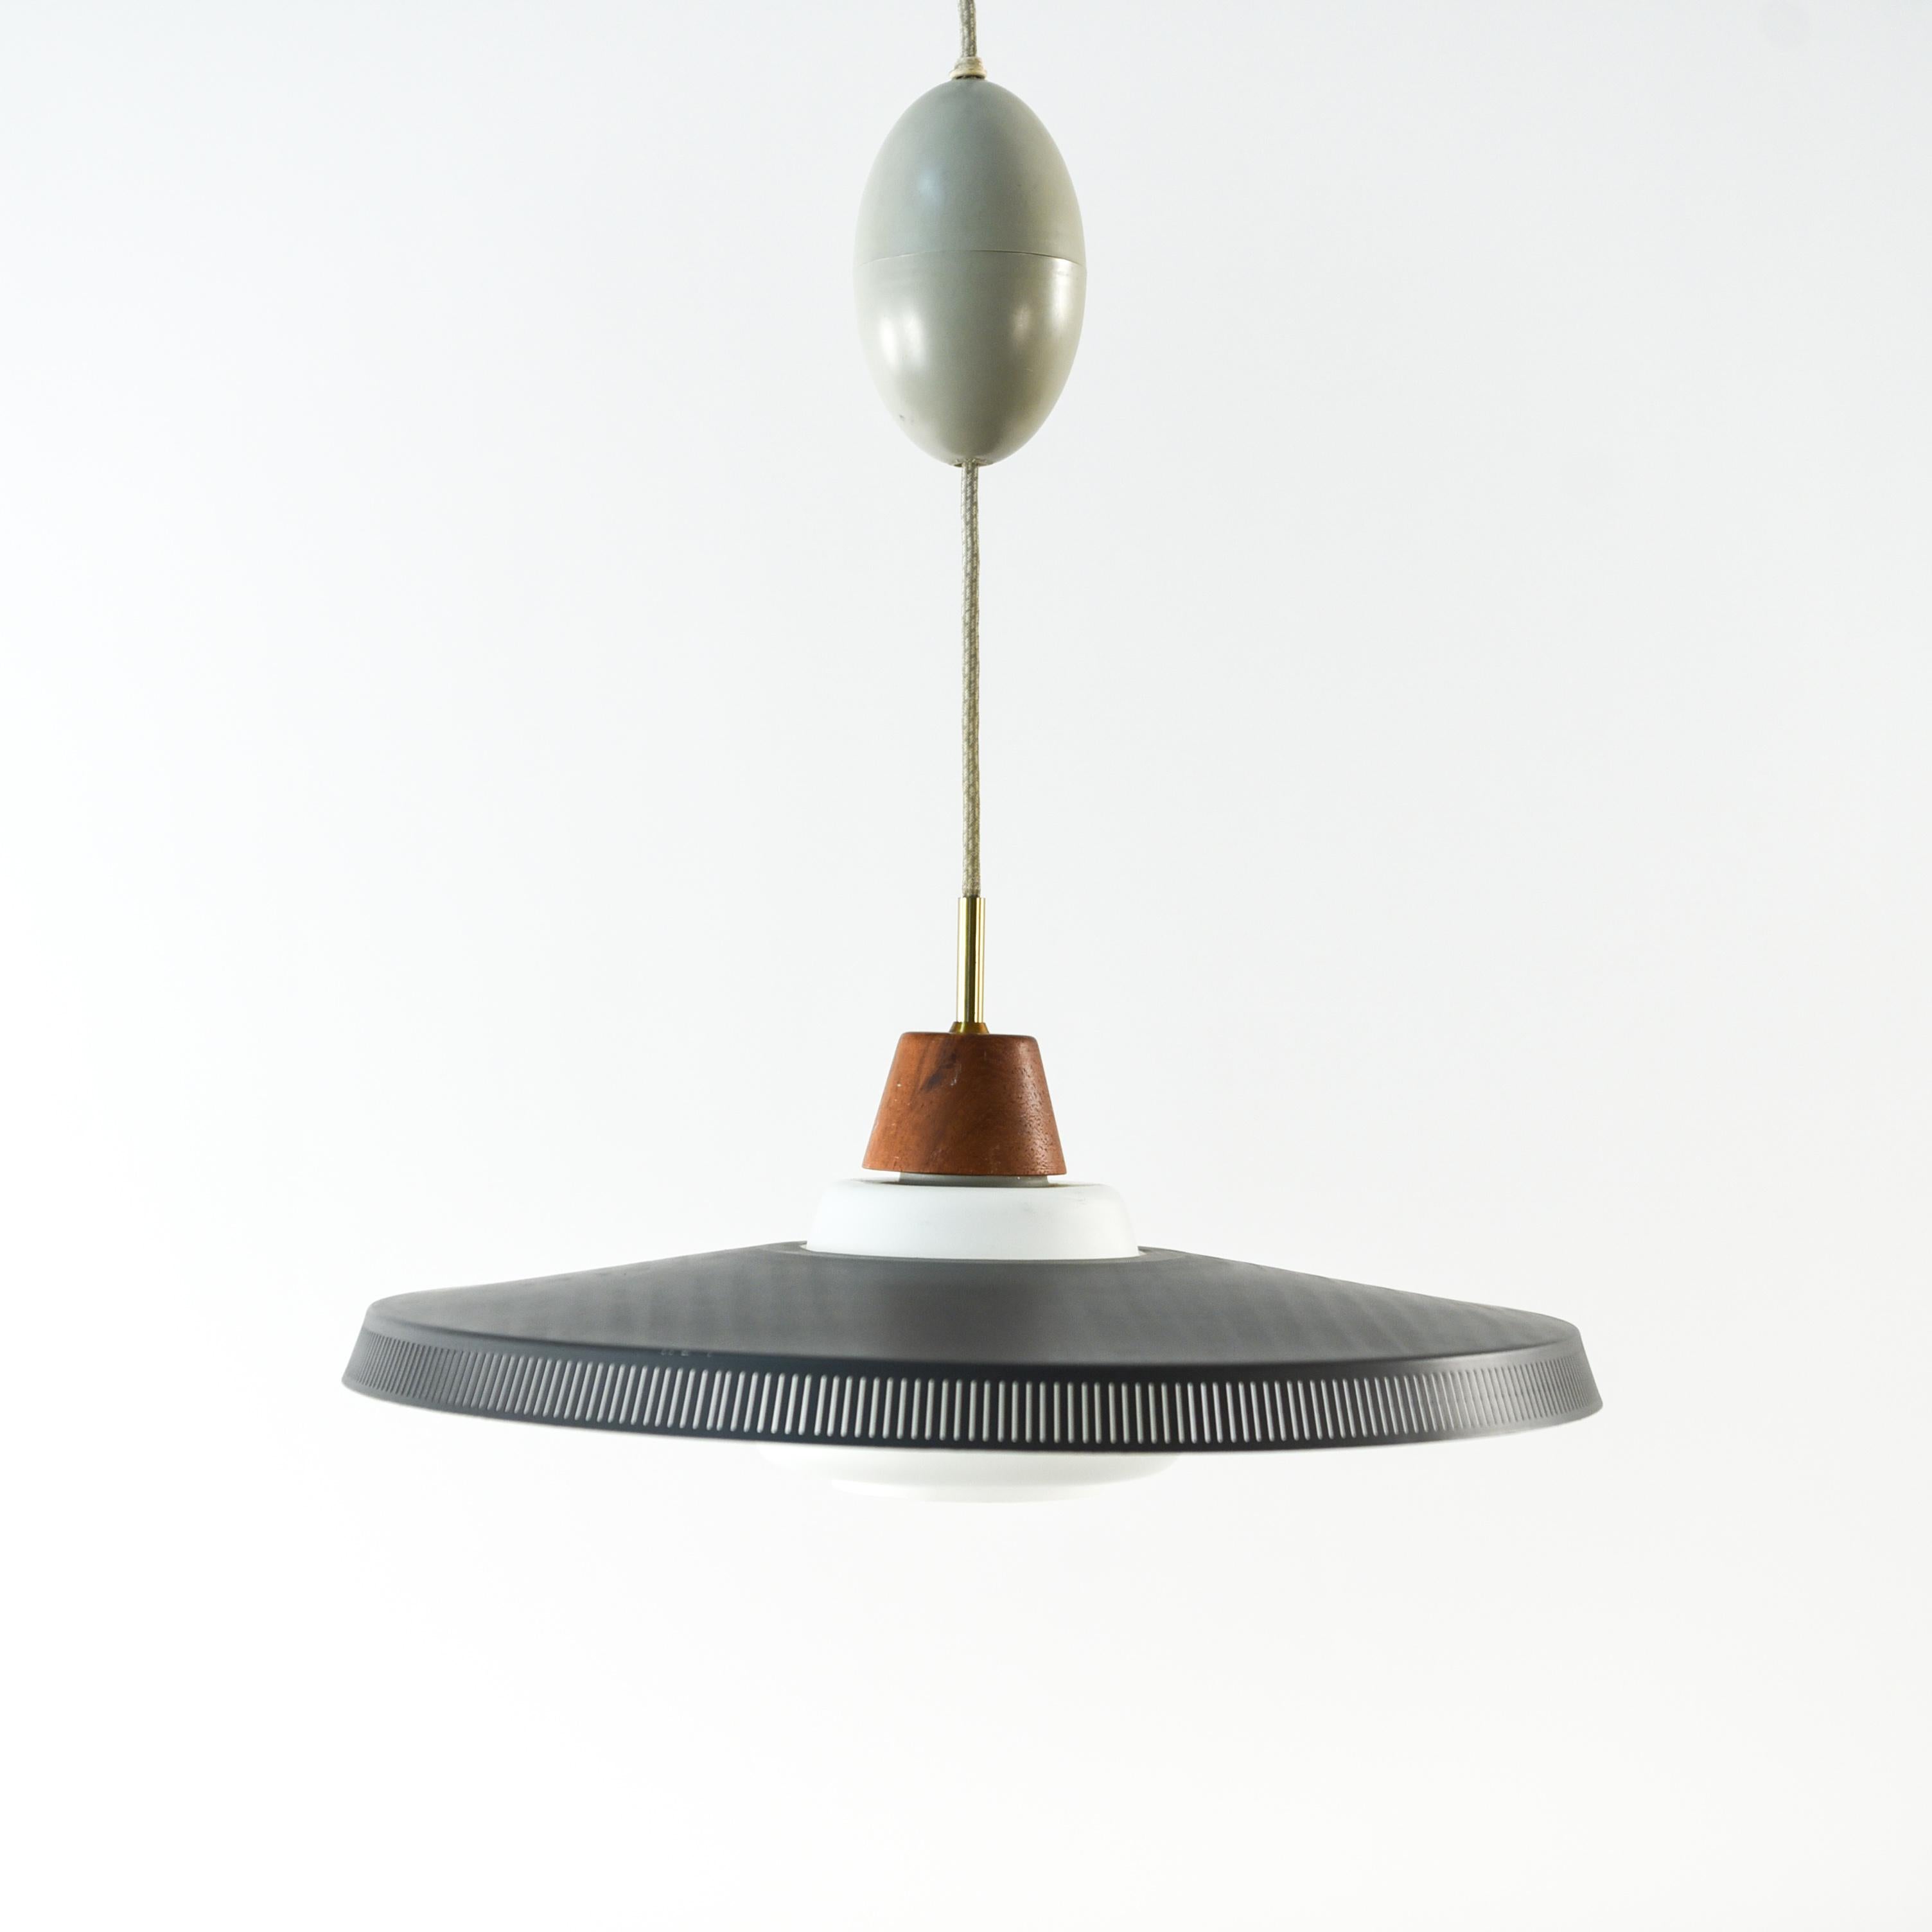 This Danish midcentury pendant light was designed by Bent Karlby for Lyfa, circa 1950s. It features a perforated metal shade with a teak accent above. This piece has an interesting, unusual shallow saucer form.